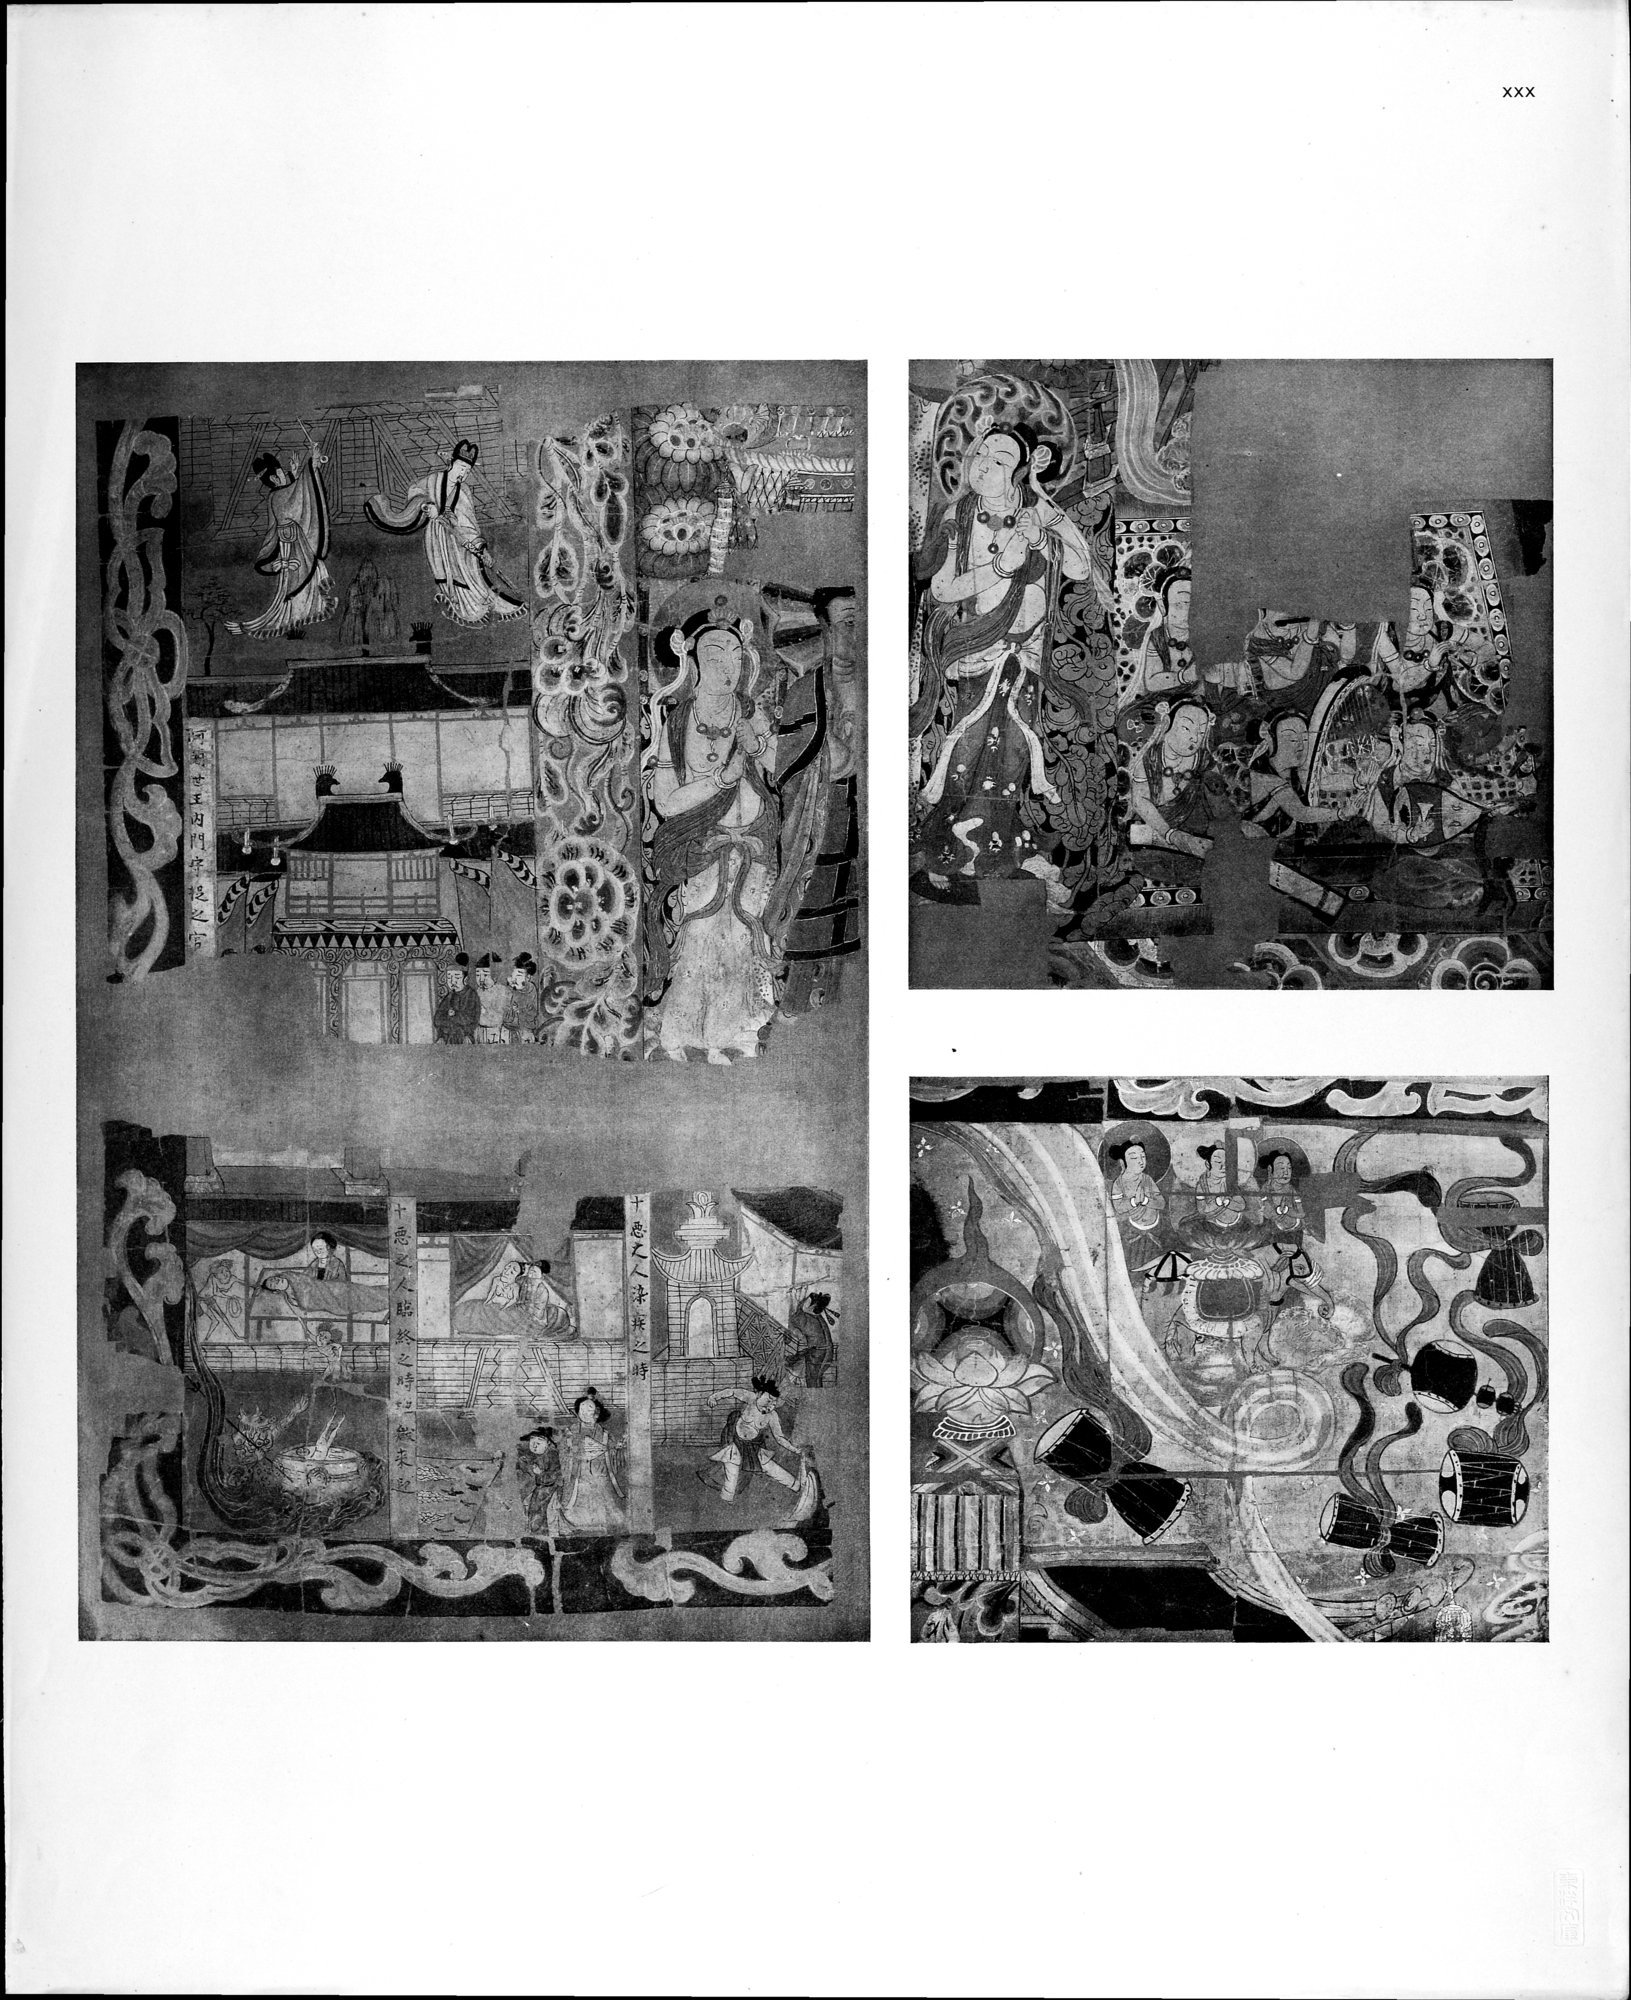 The Thousand Buddhas : vol.1 / Page 115 (Grayscale High Resolution Image)